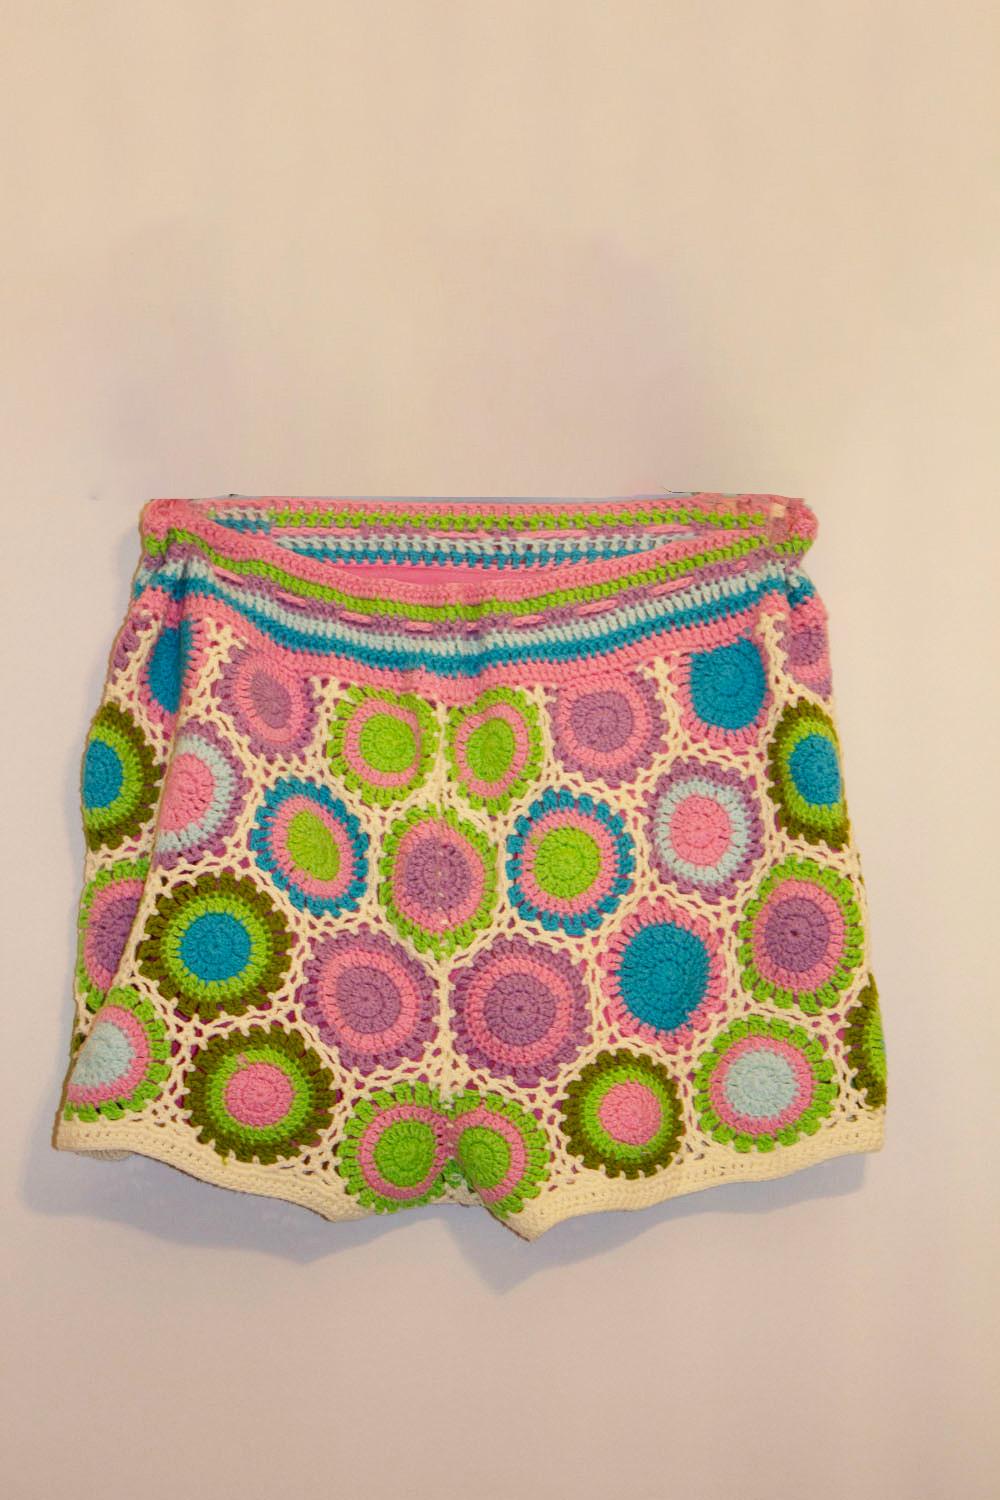 A great pair of colourful crochet shorts by Farm Rio.
Great for Summer days and evenings. The multicolour shorts have a pink lining , and drawstring waist.
Measurements: waist up to 32'', length 12''